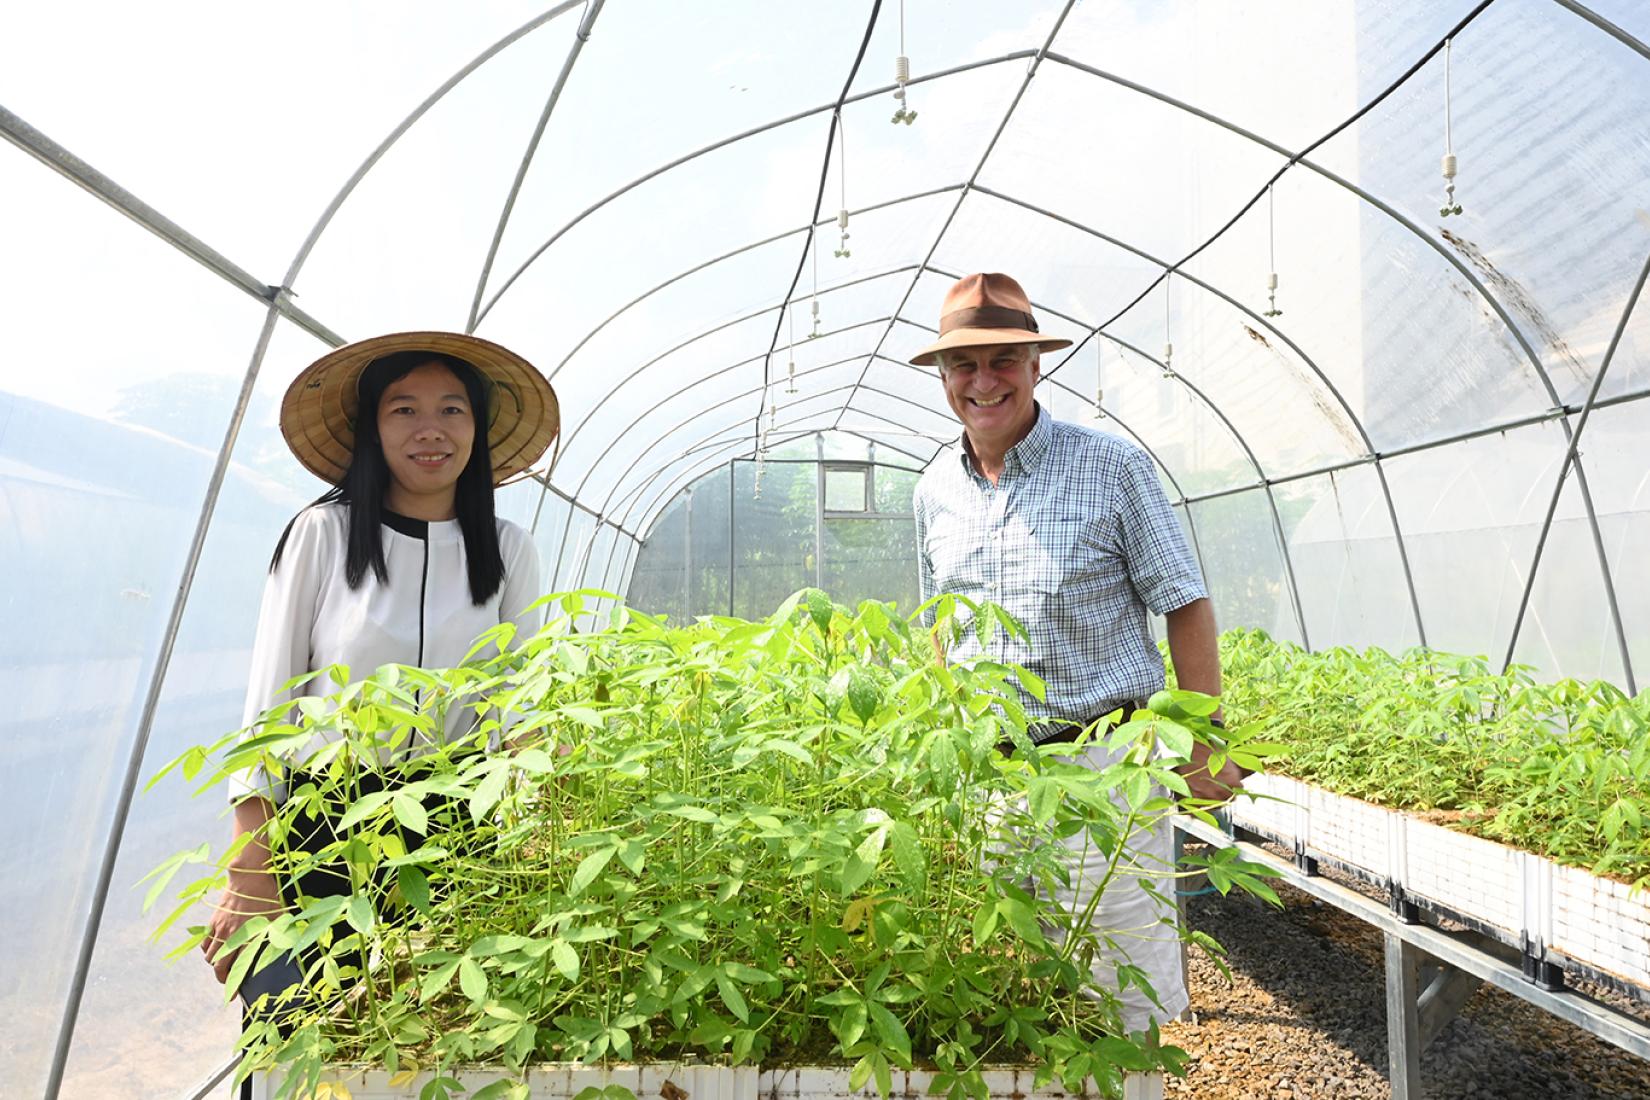 Two people next to cassava seedlings in a greenhouse